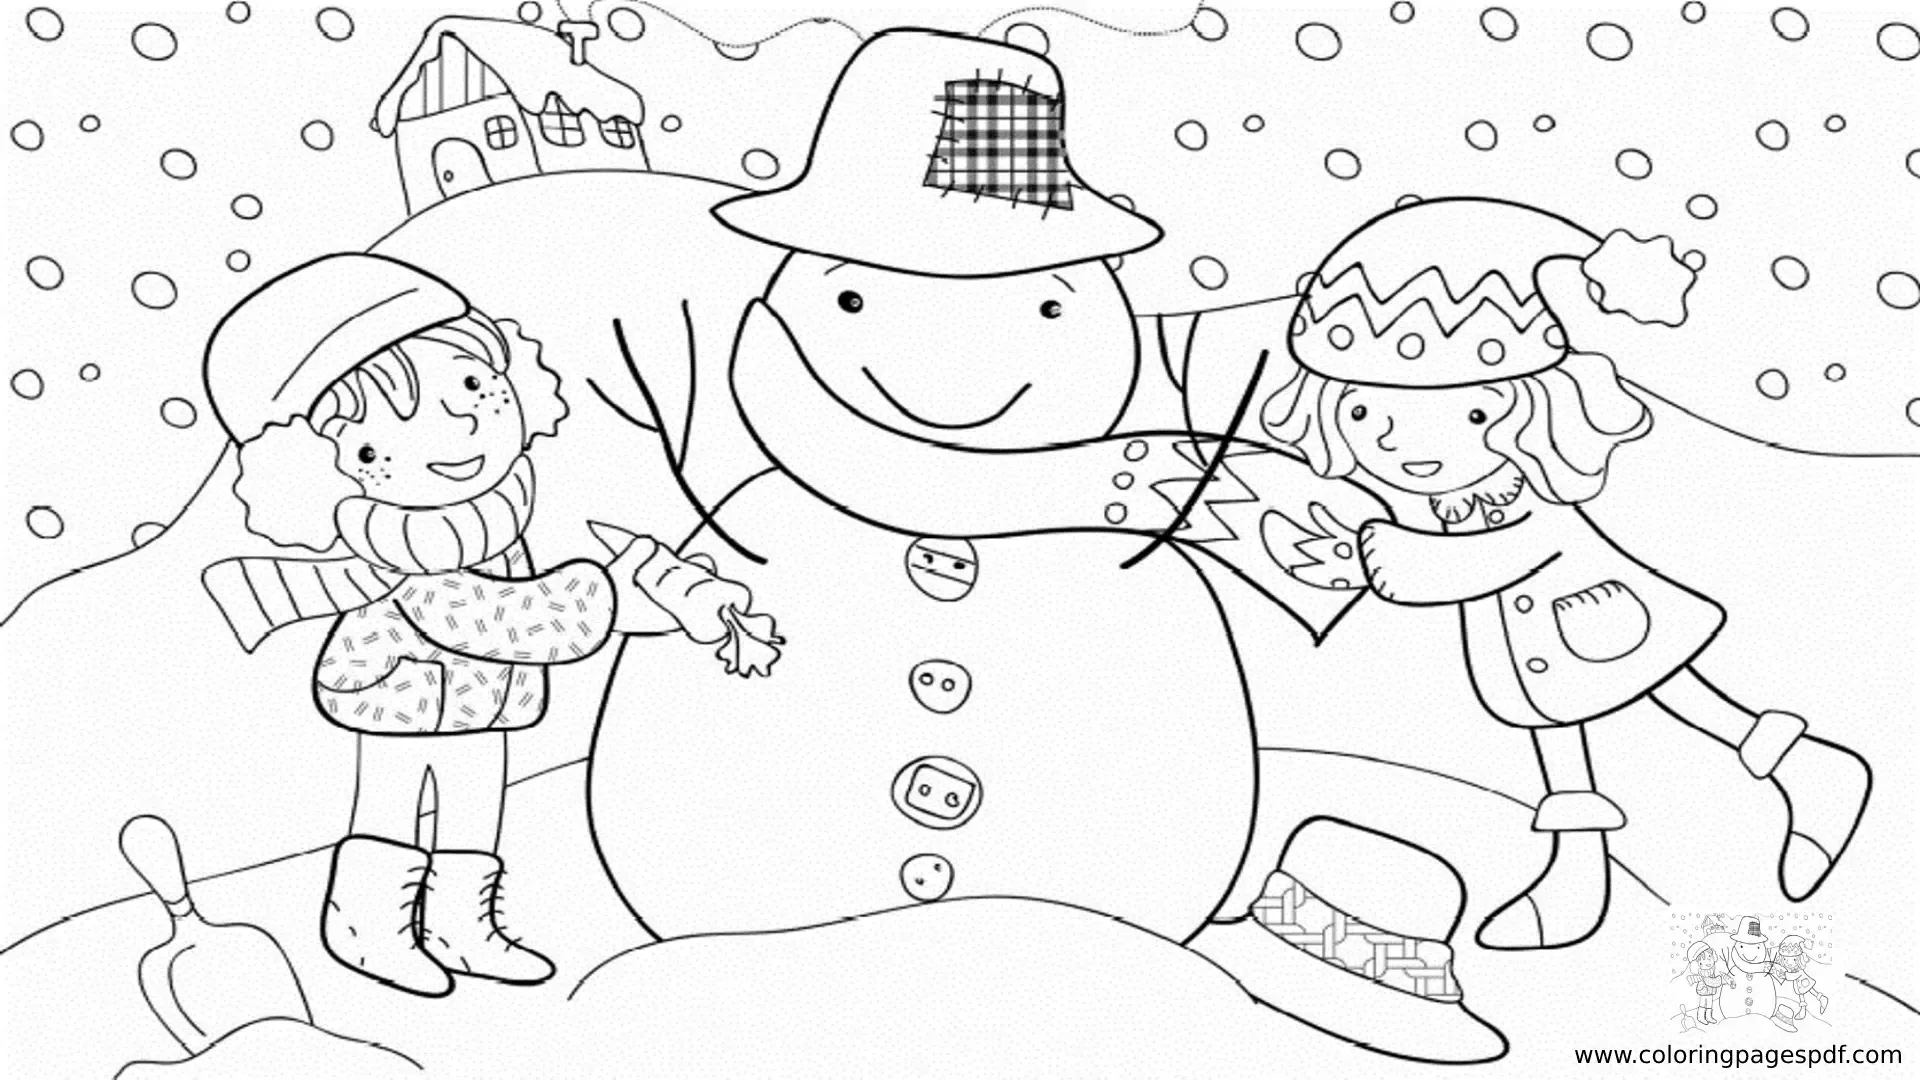 Coloring Pages Of Kids Making A Snowman